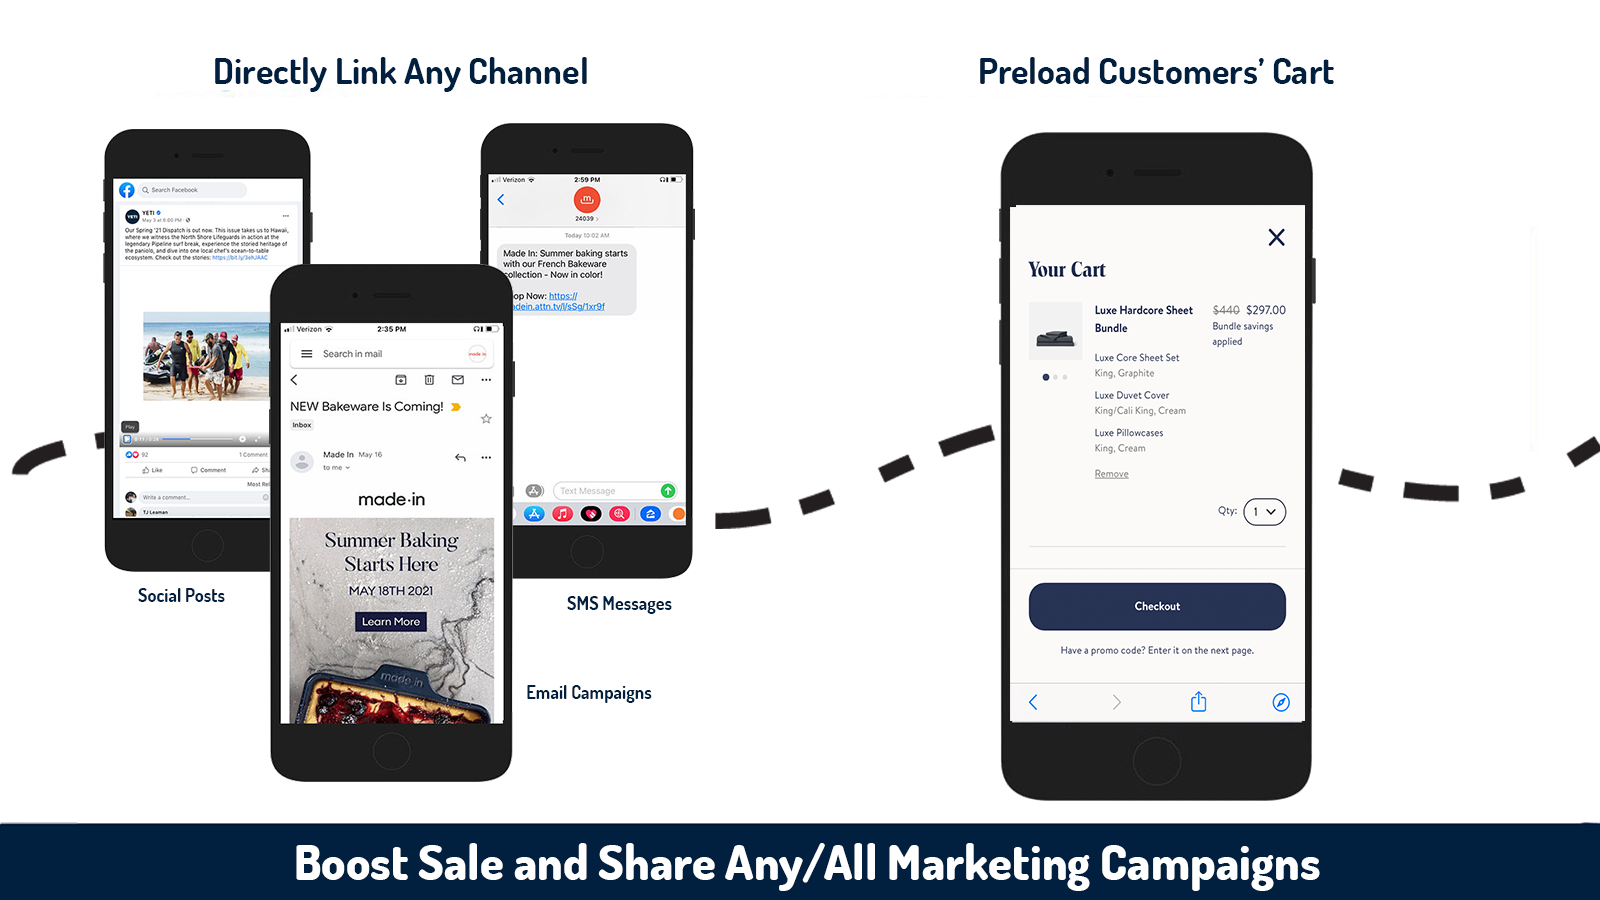 share ziplinks in any campaign and watch conversions rates grow